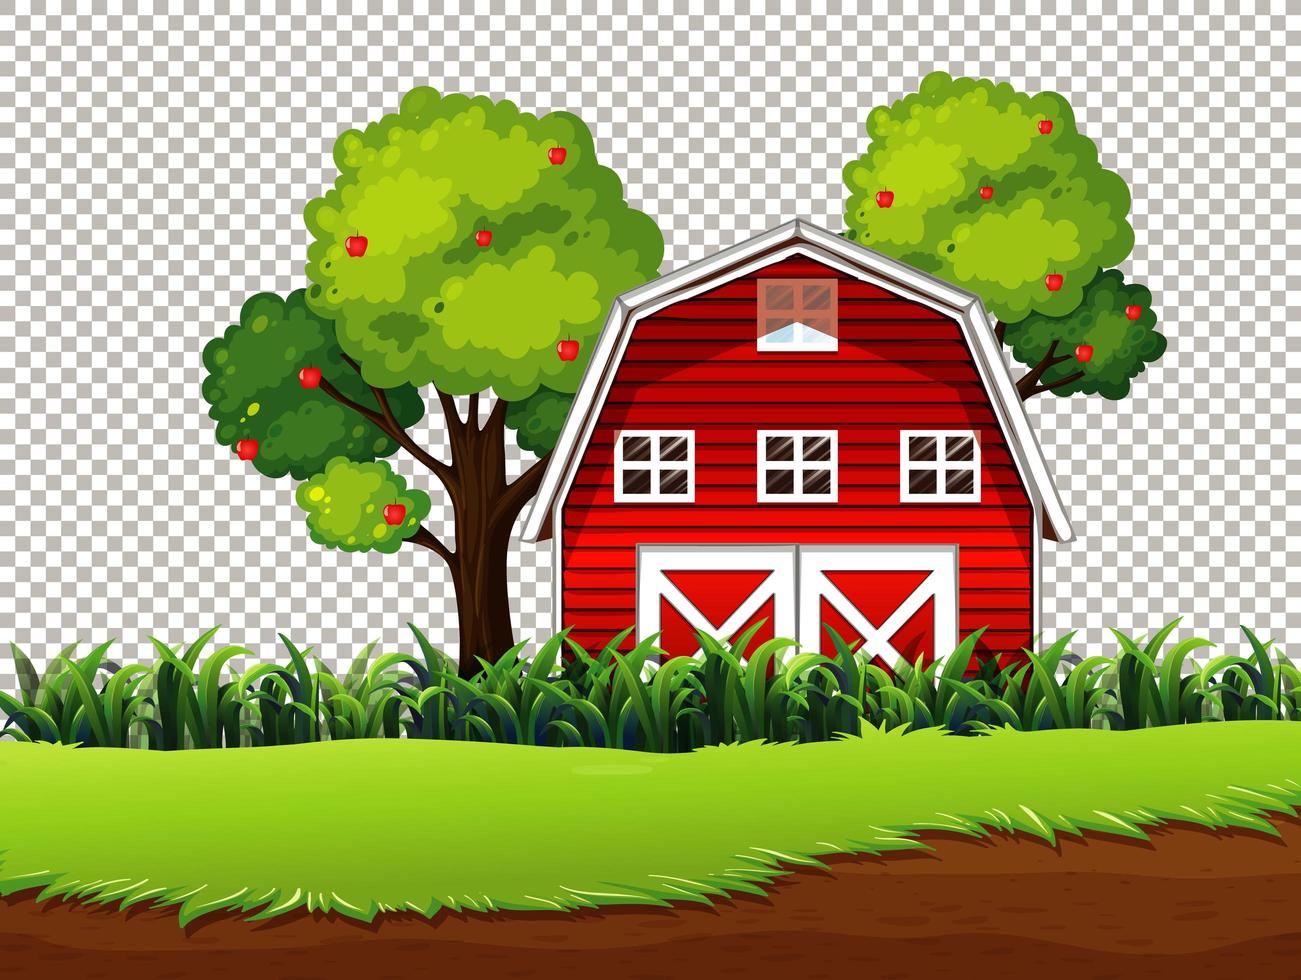 Red barn with meadow and apple tree on transparent background vector